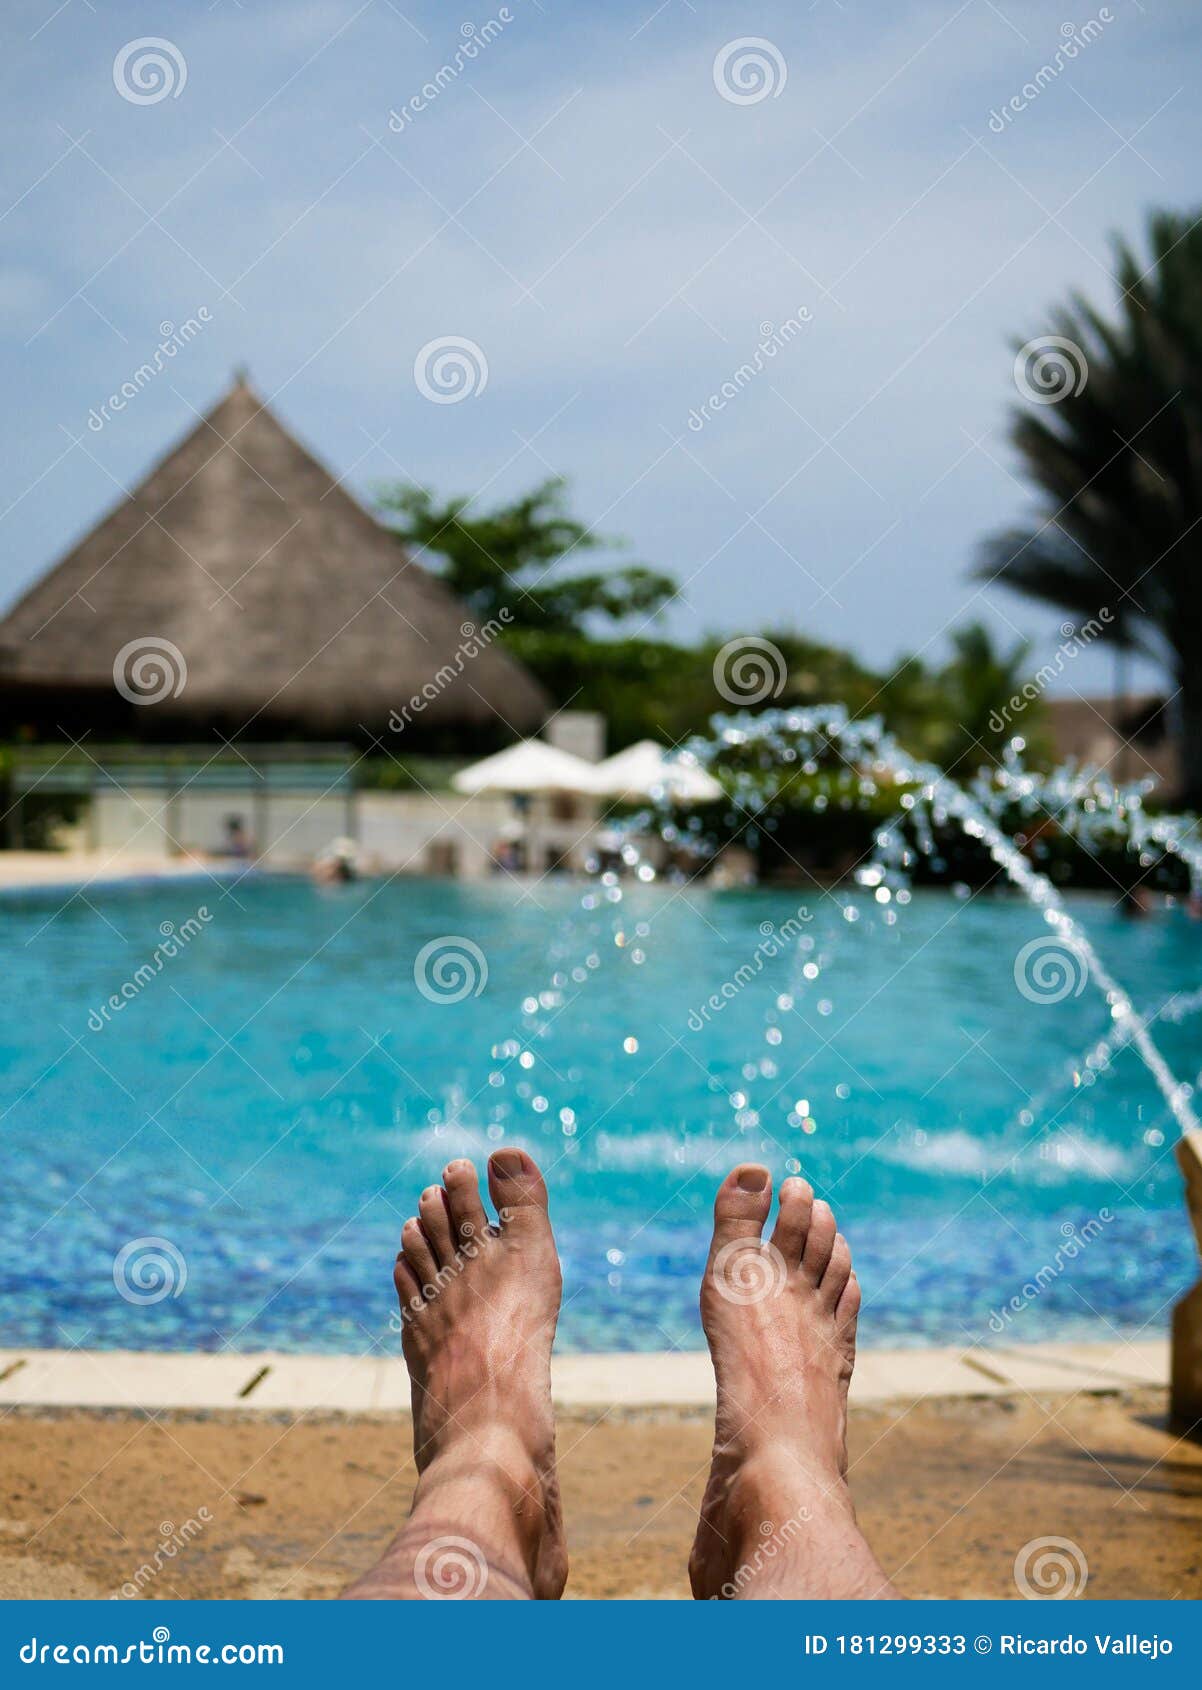 barefoot feet of a man taking a sun bath in a pool with fountains nd a hut on the background